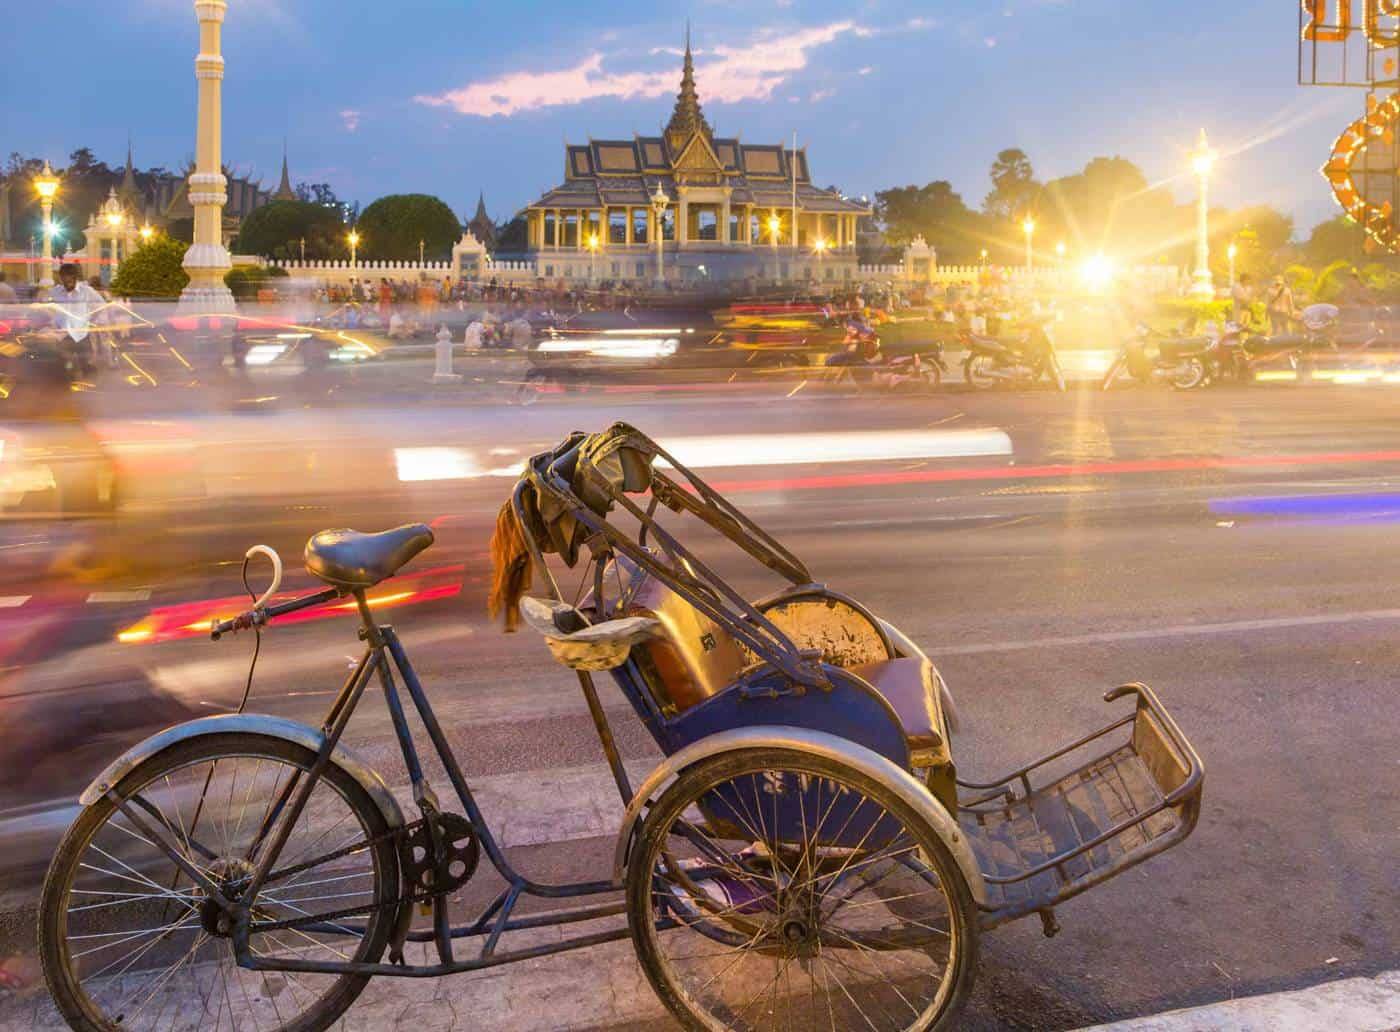 HOW TO SEE THE BEST OF PHNOM PENH IN ONE DAY